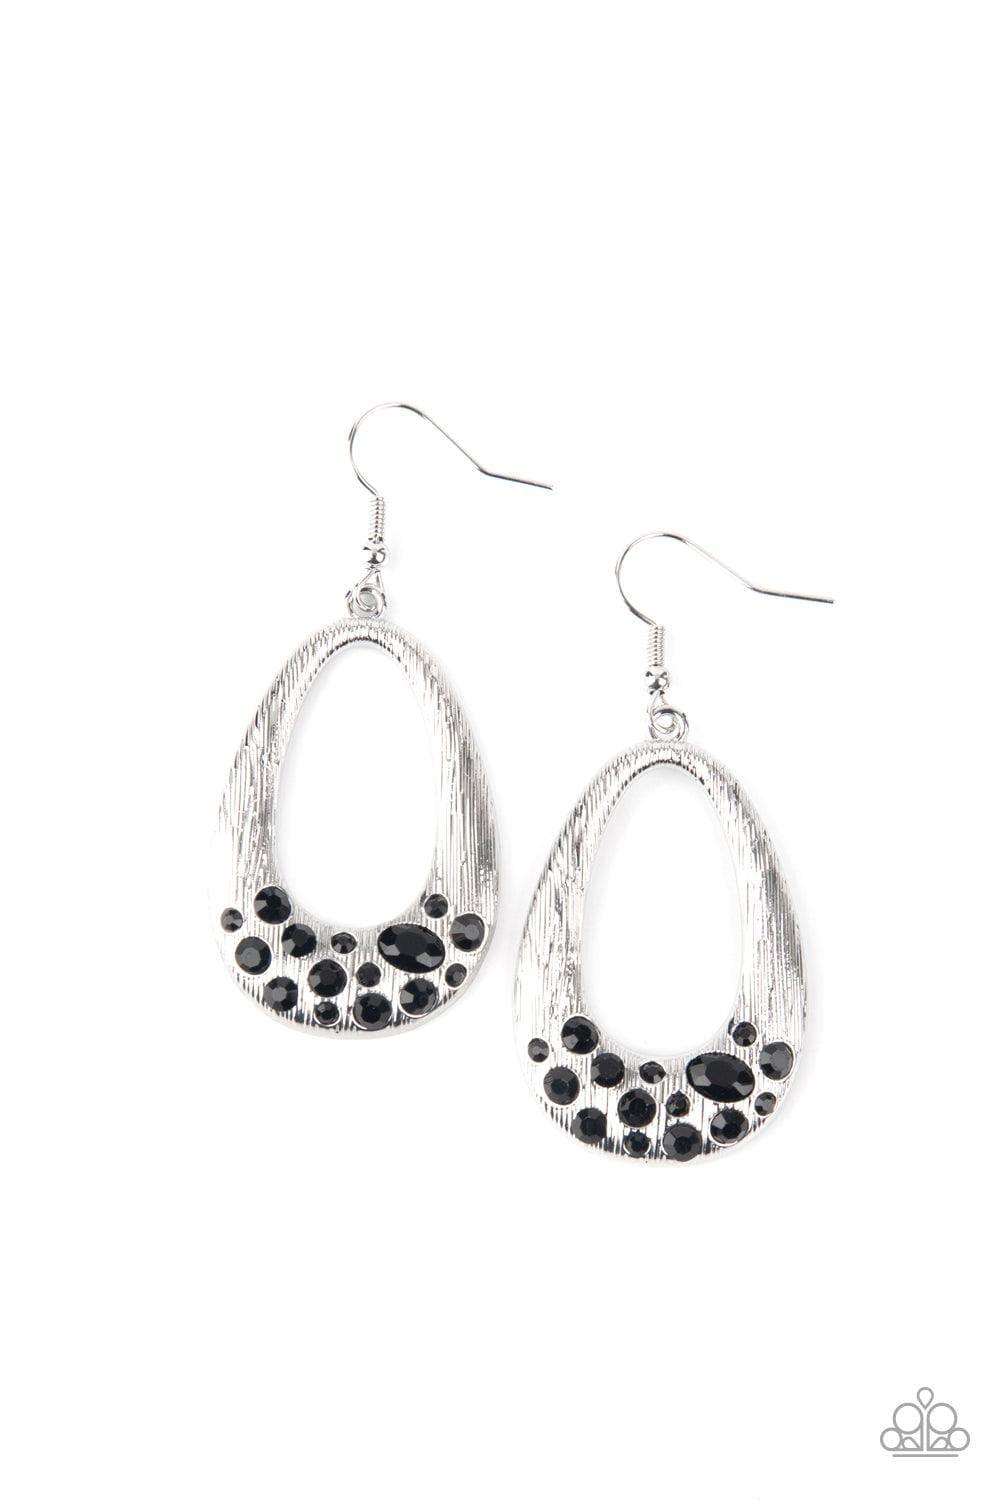 Paparazzi Accessories - Better Luxe Next Time - Black Earrings - Bling by JessieK